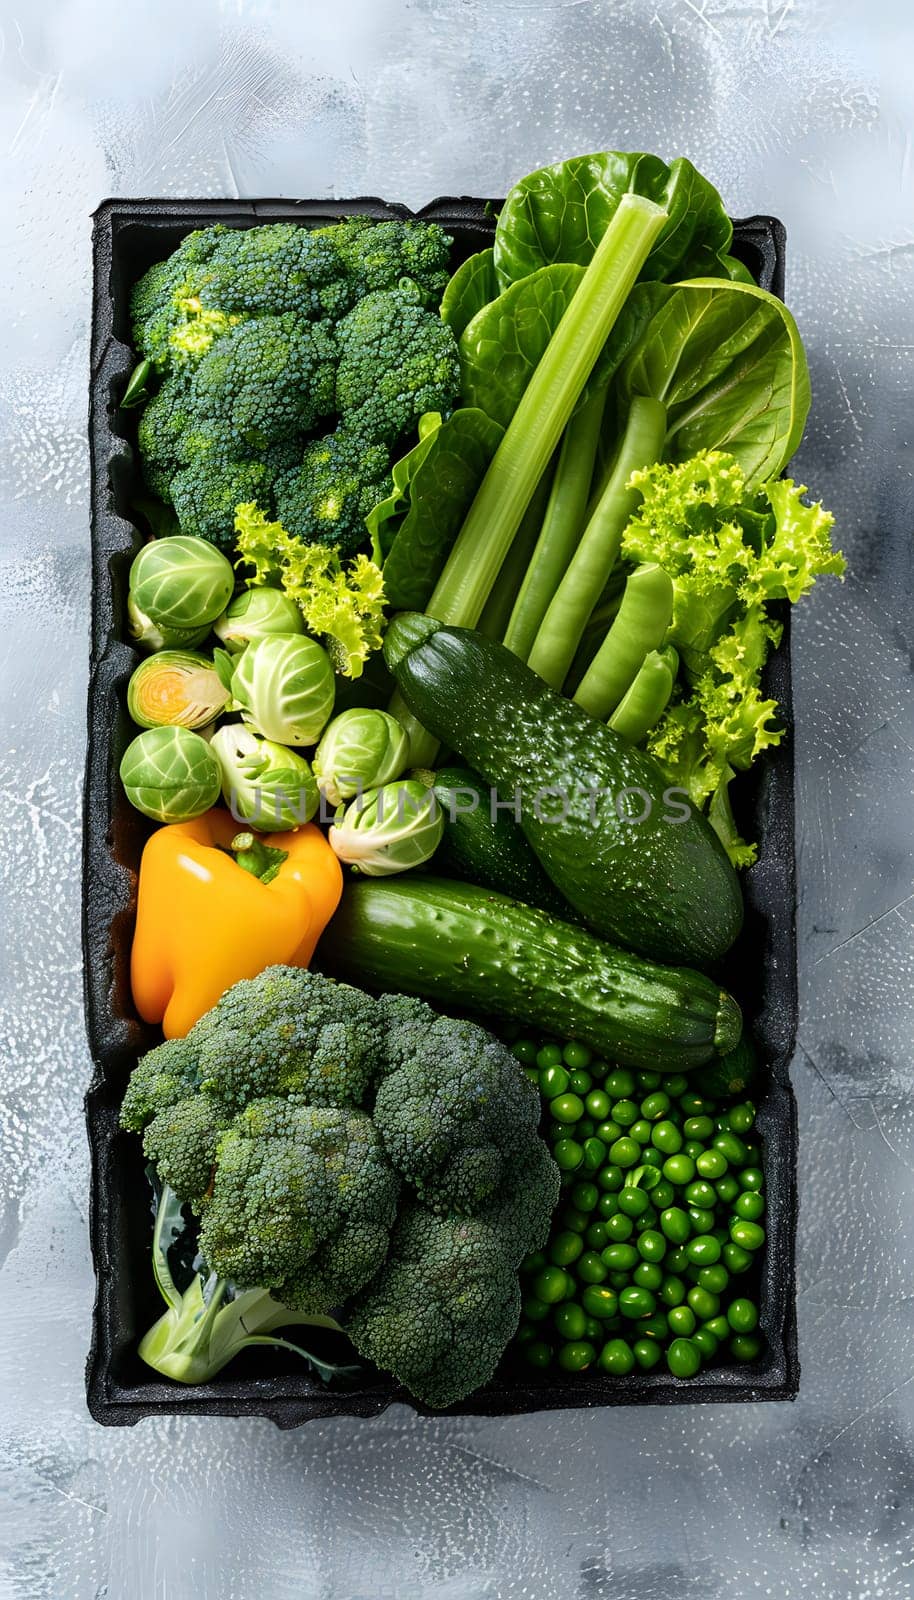 Black box of green vegetables, a mix of natural leafy ingredients on the table by Nadtochiy